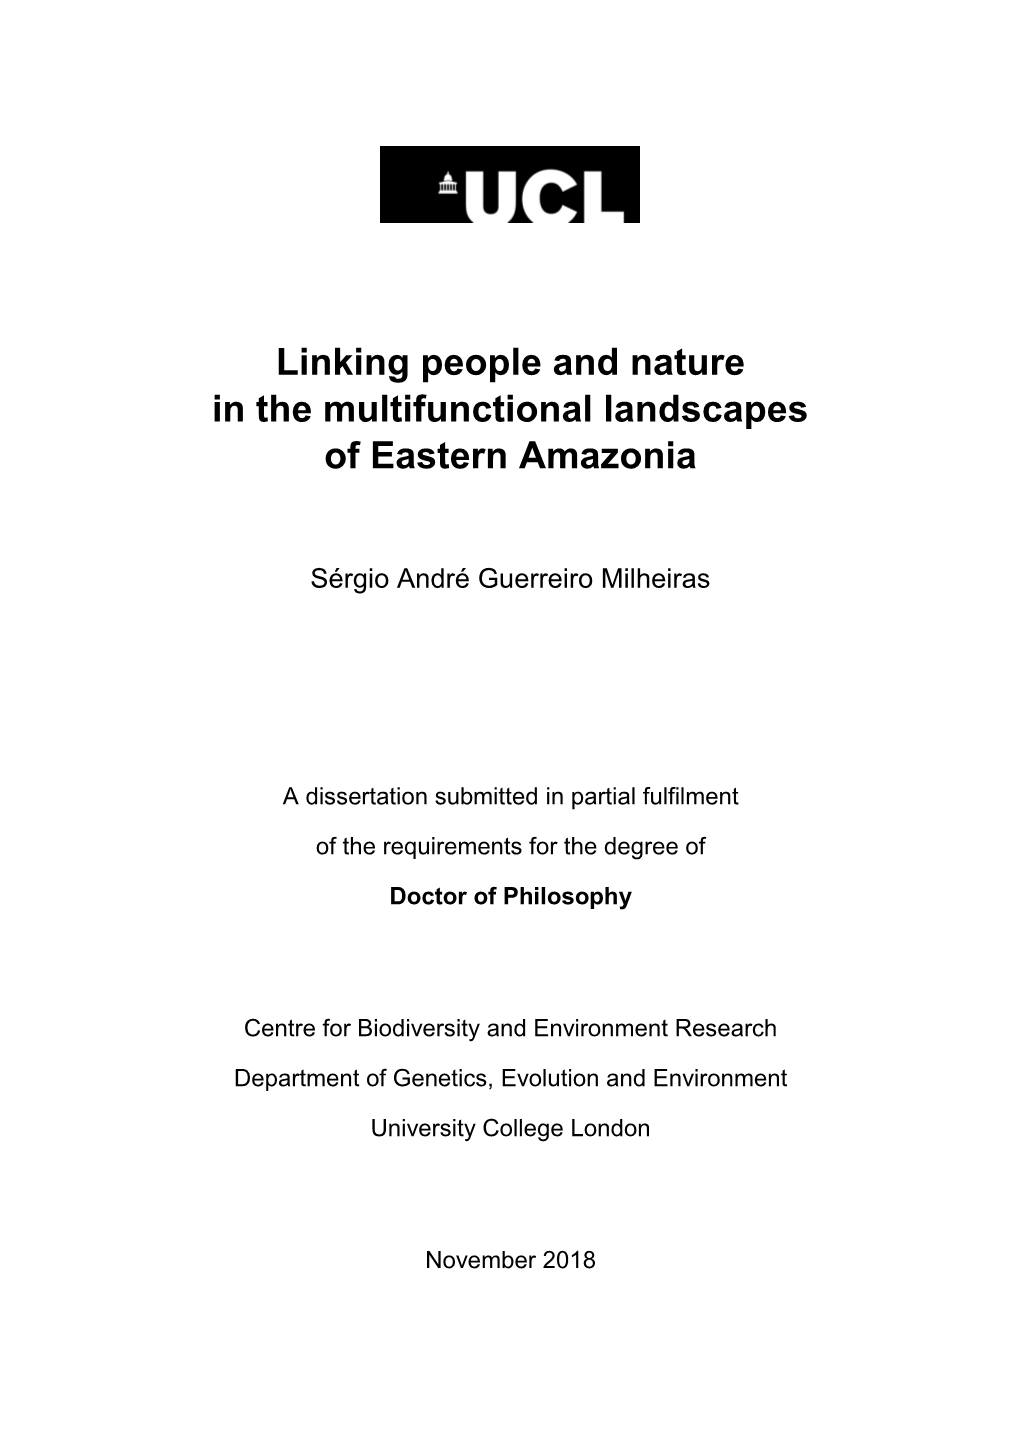 Linking People and Nature in the Multifunctional Landscapes of Eastern Amazonia